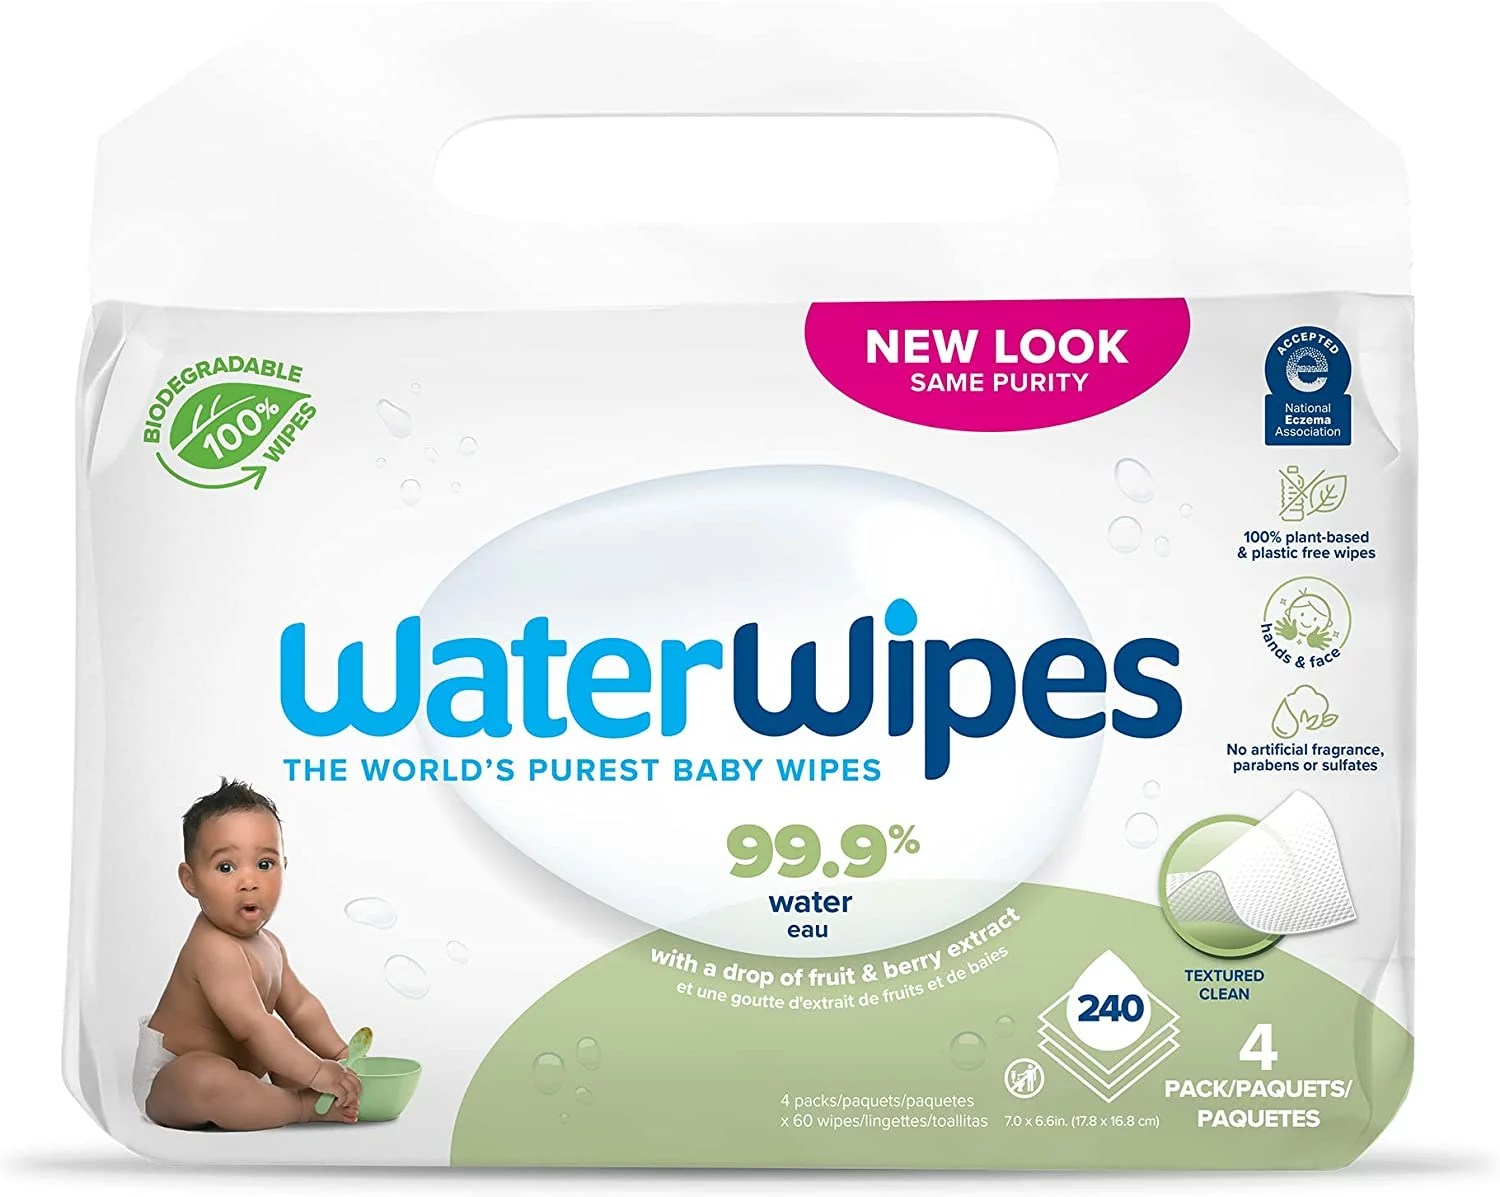 Wet Ones Hand Wipes for Sensitive Skin | Wipes Case for Hand and Face | 20  ct. Travel Size (10 pack)